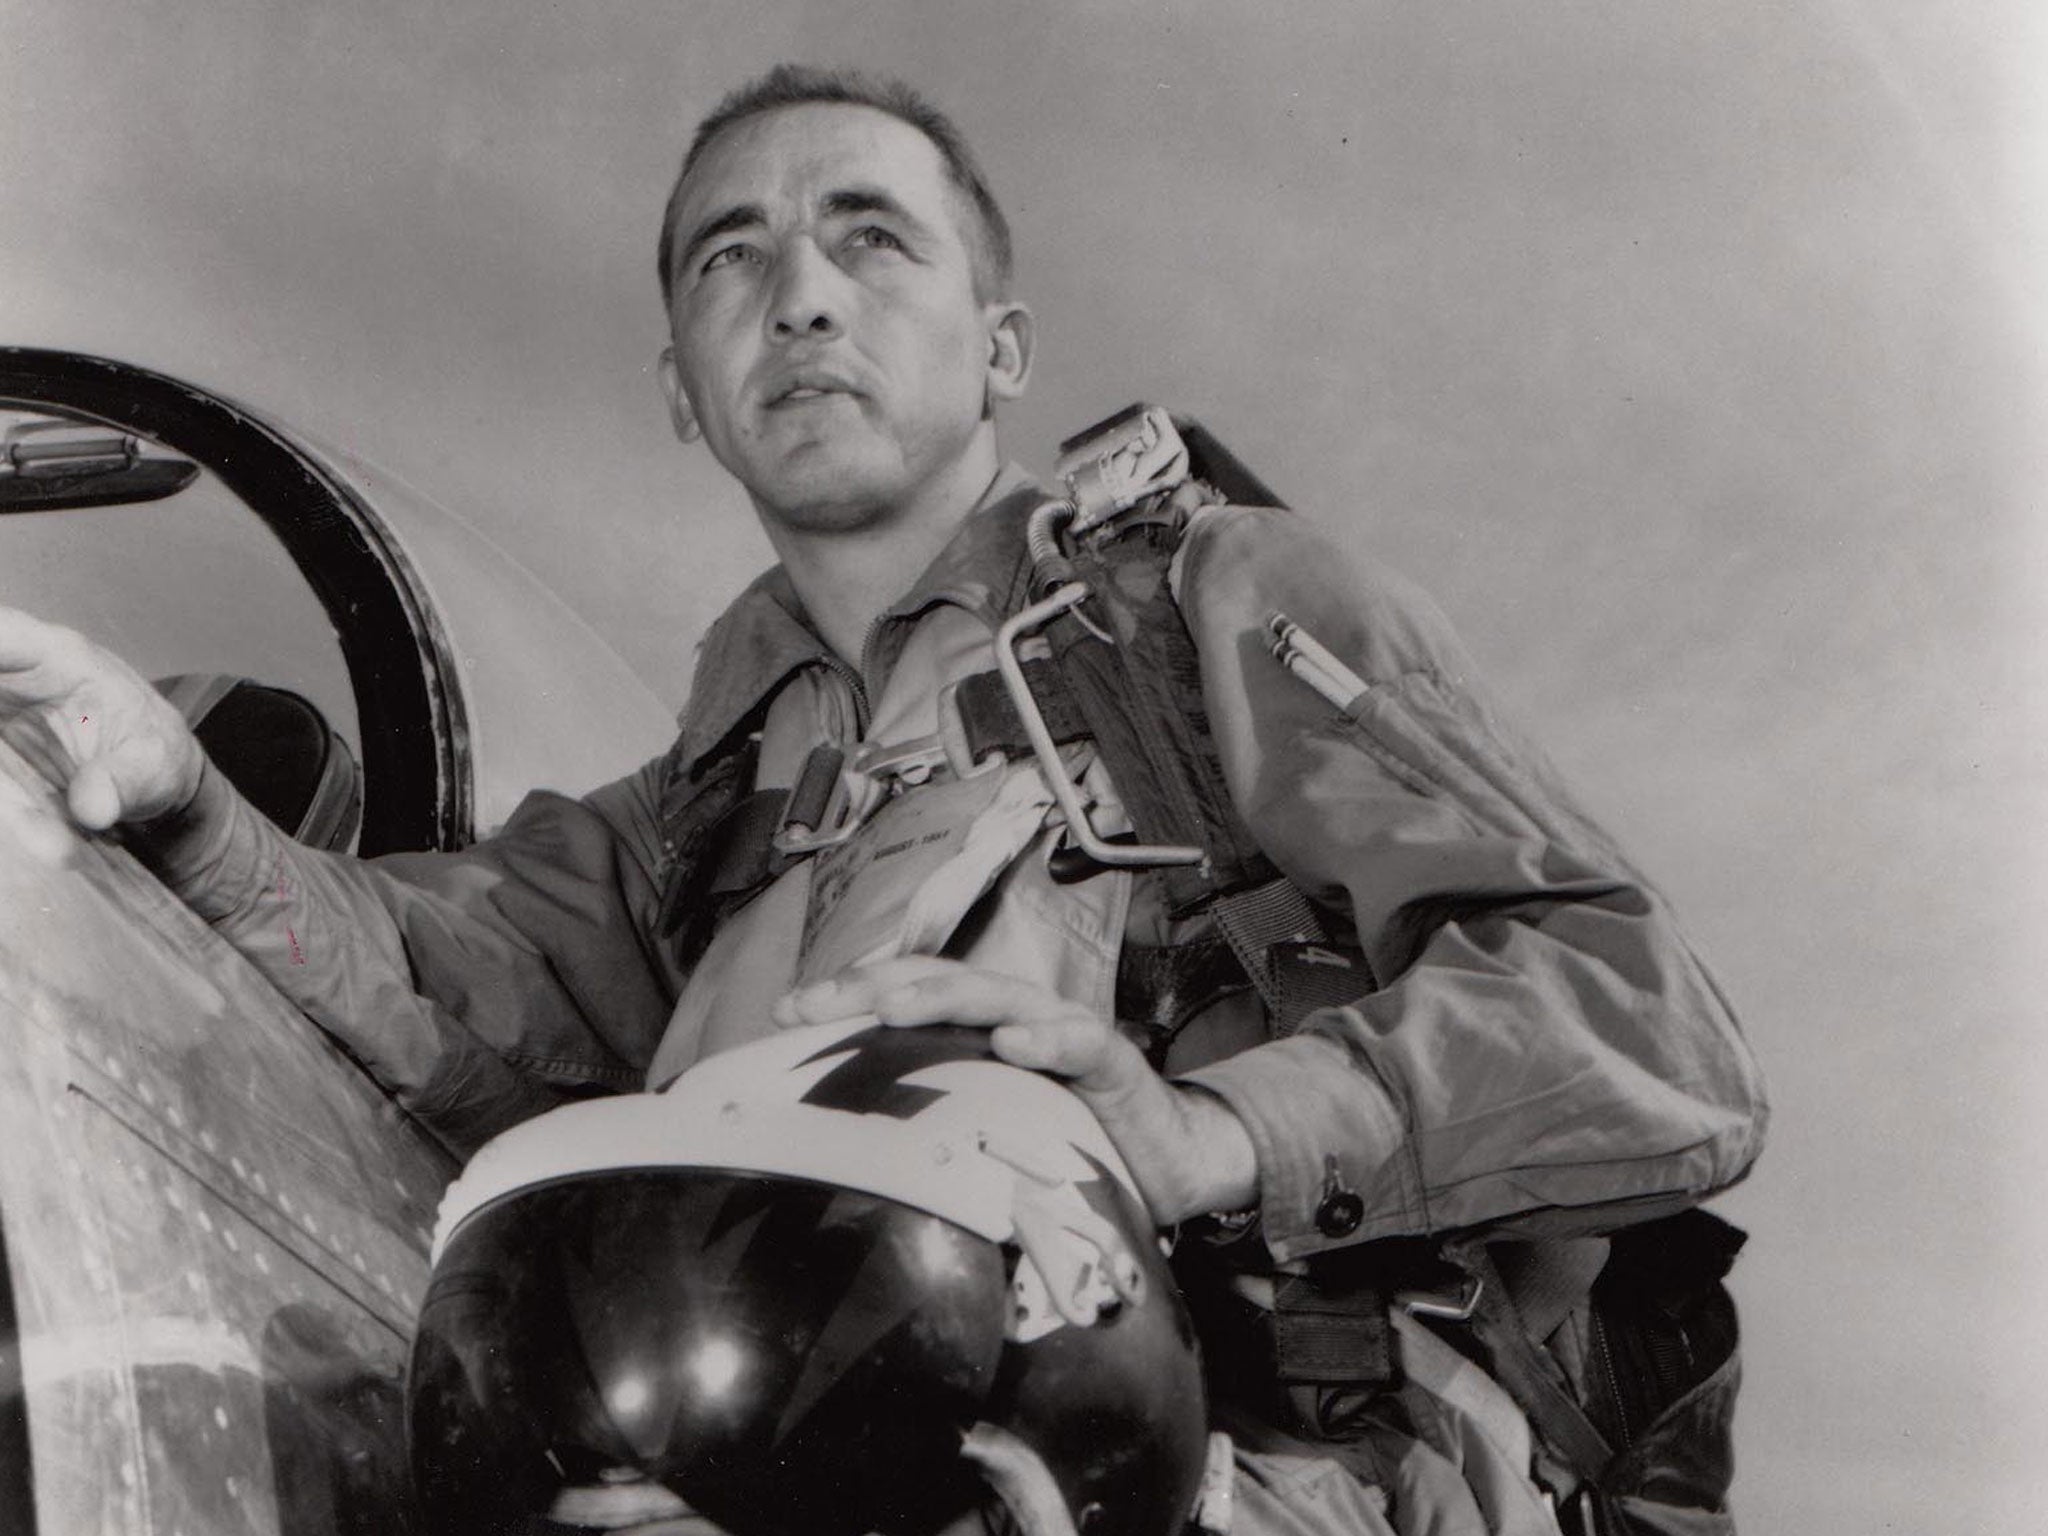 Risner: he led the first flight of Operation Rolling Thunder